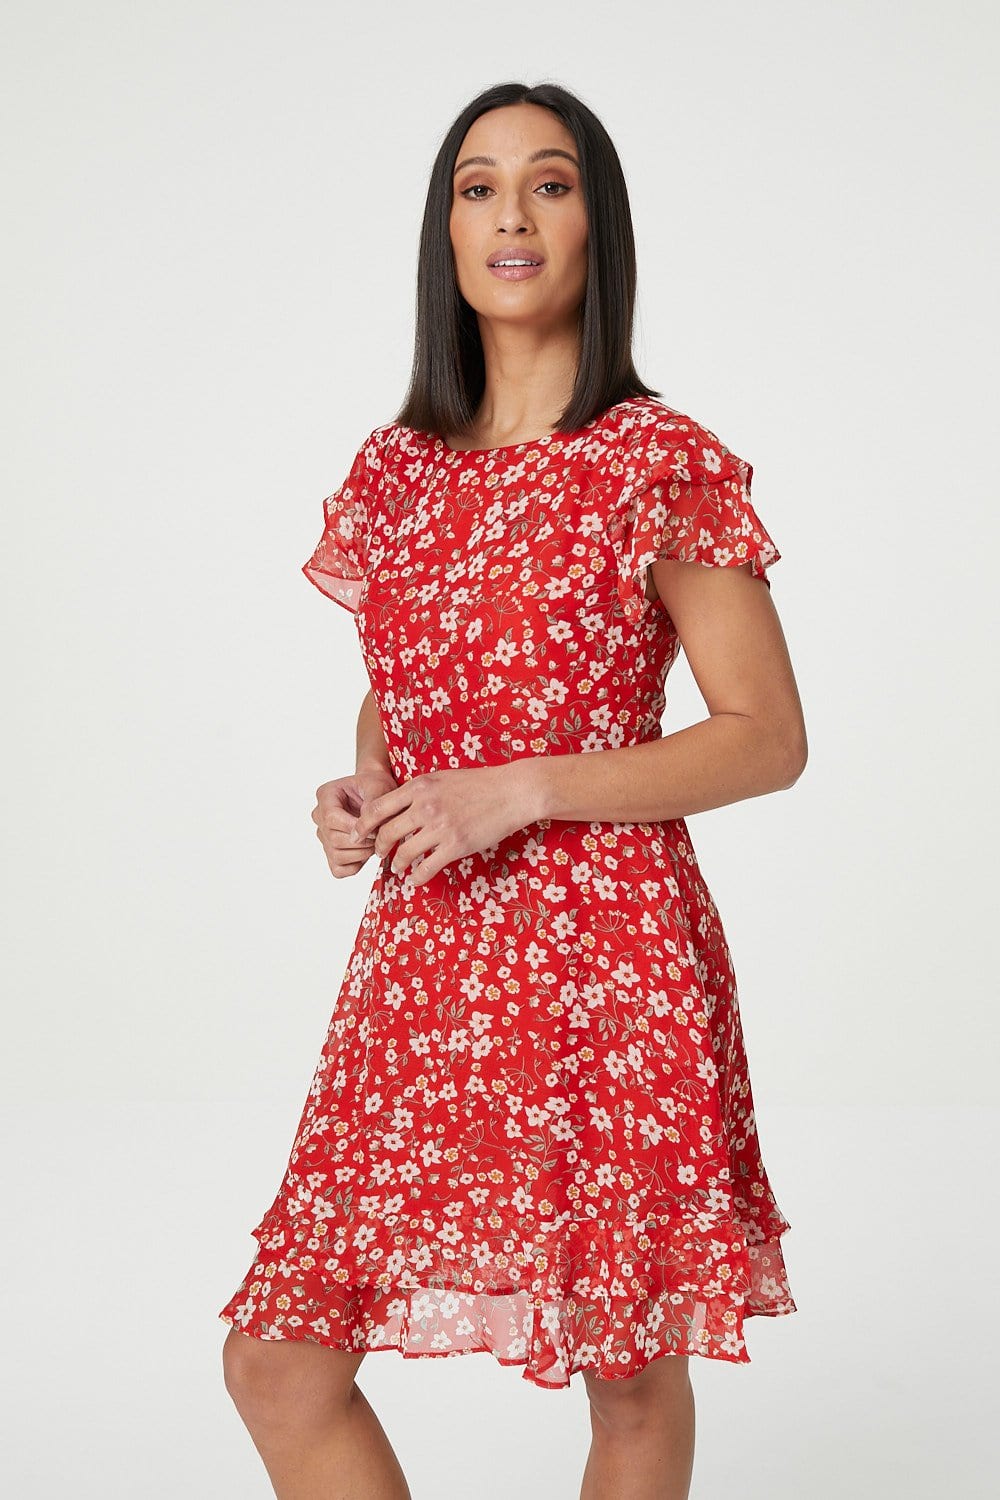 Red | Ditsy Floral Frilled Sleeve Dress : Model is 5'7.5"/171 cm and wears UK8/EU36/US4/AUS8